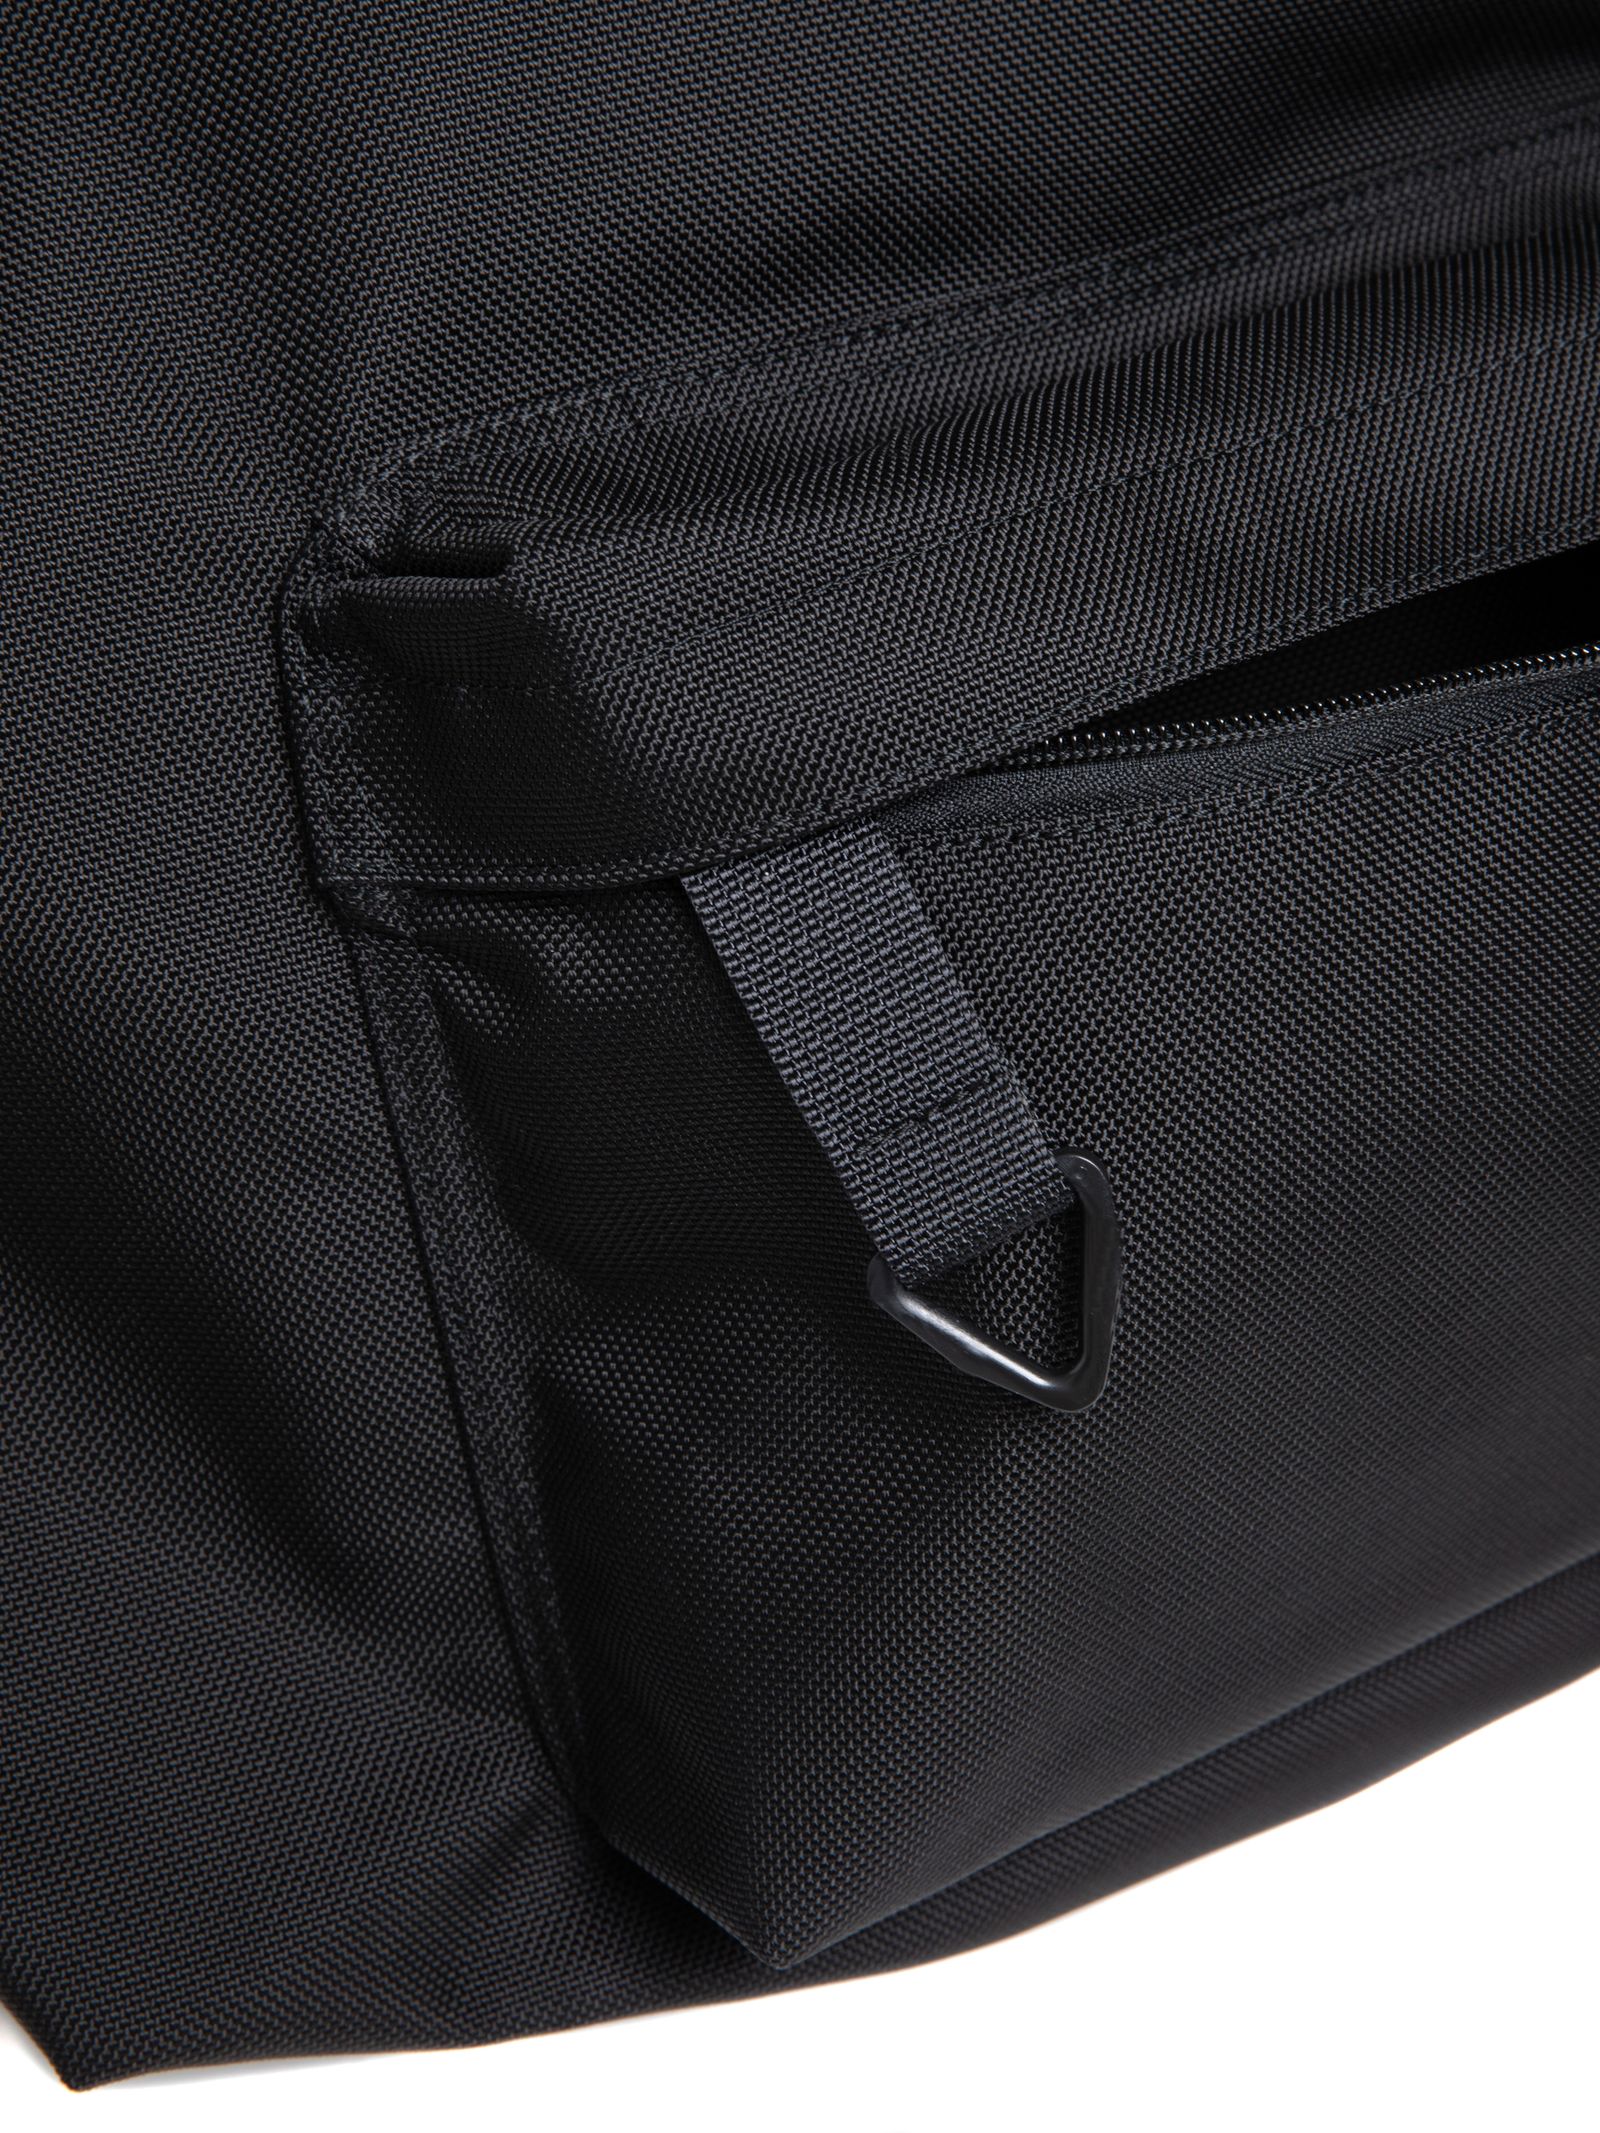 COOTIE PRODUCTIONS - STANDARD DAY PACK (BLACK) / スタンダード